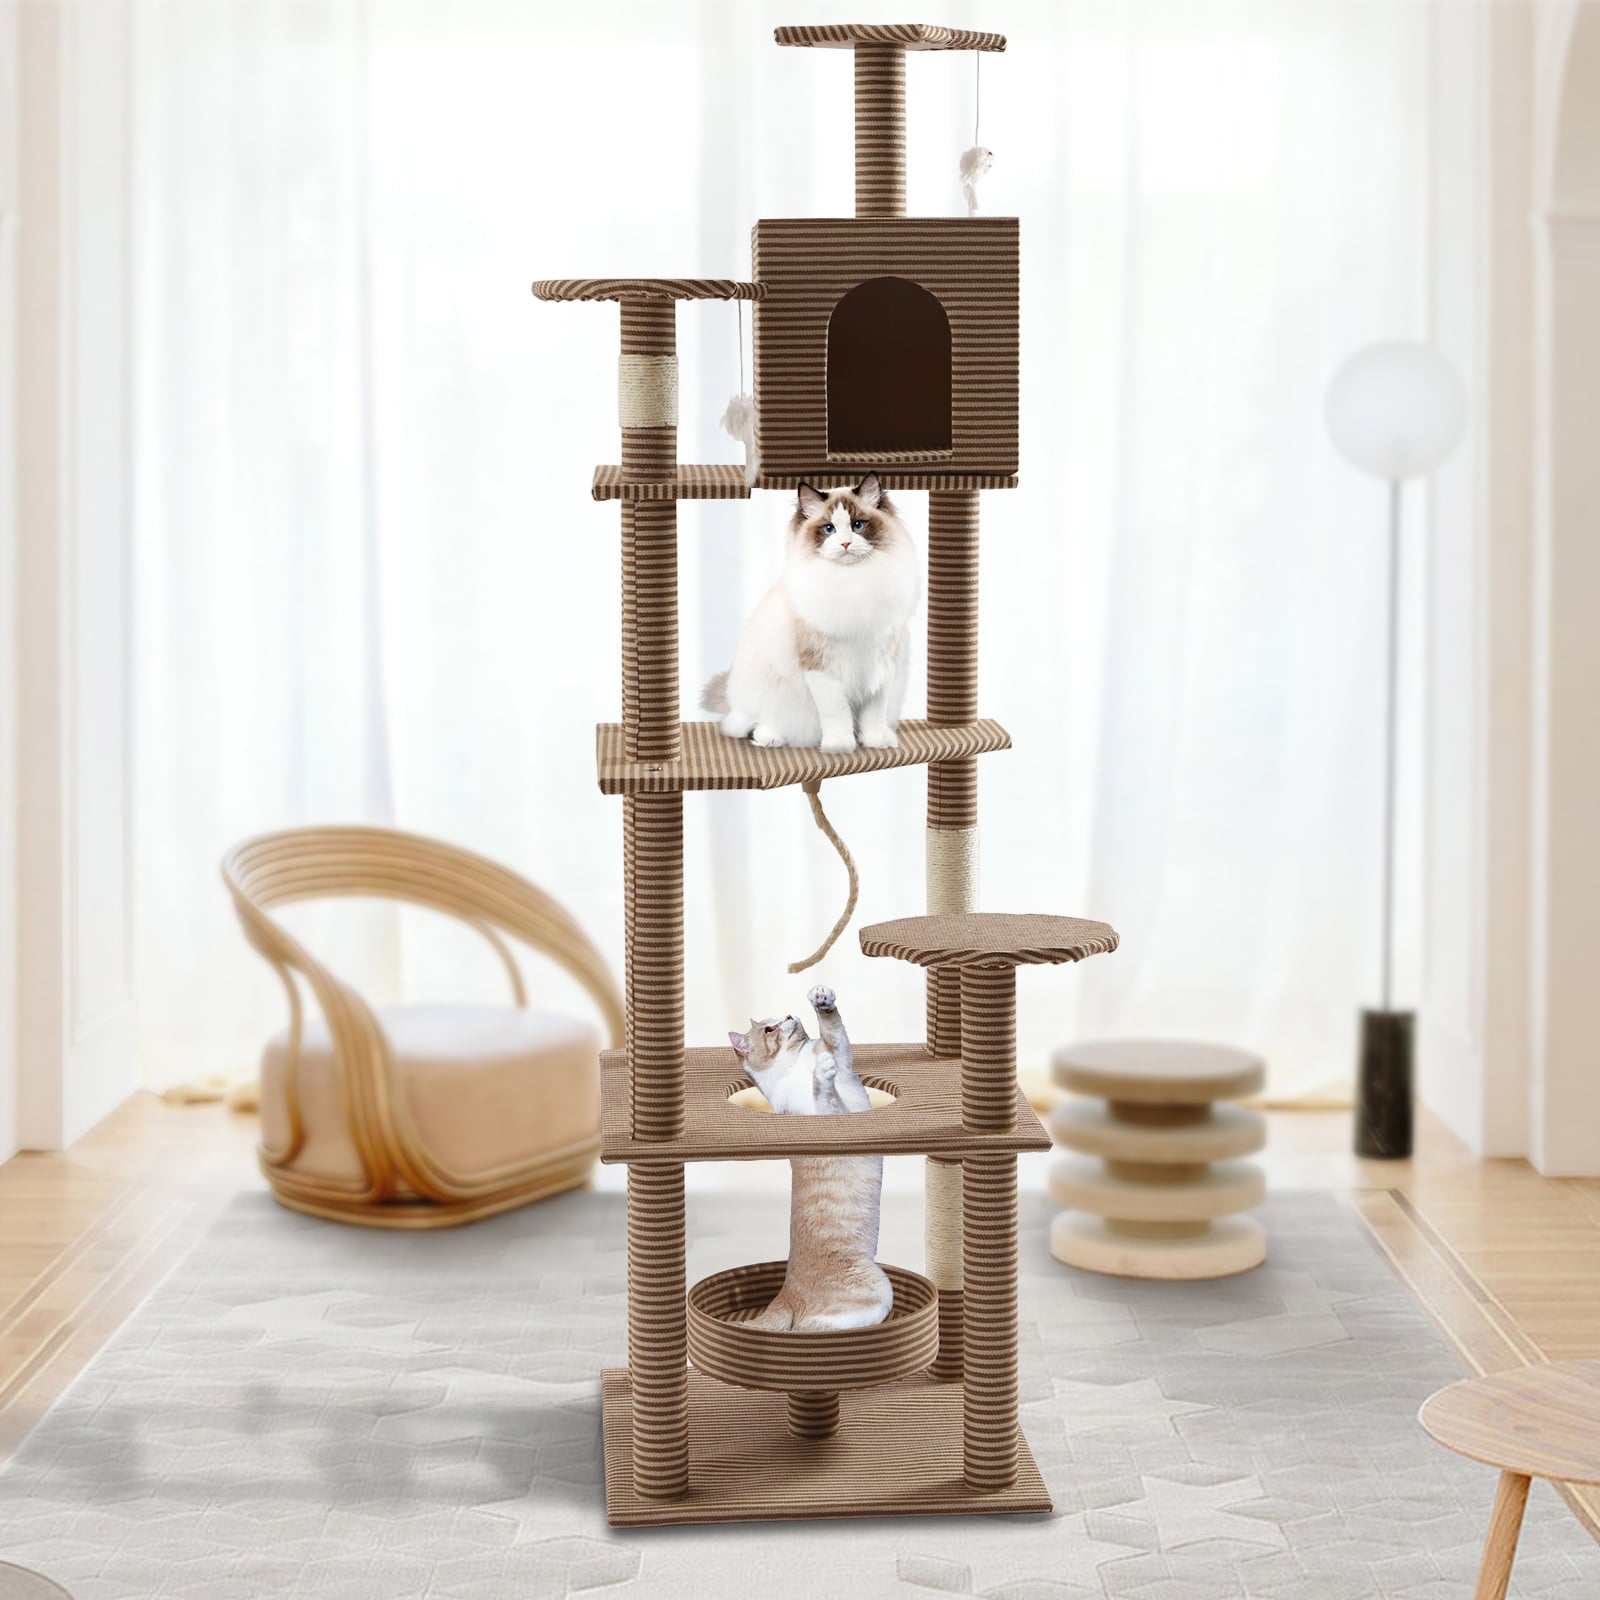 Loyalheartdy Floor to Ceiling Cat Tree， 5.5Ft Tall Cat Climbing Tree Cat Tower Kitty Play House w/Scratching Posts Condo Perches